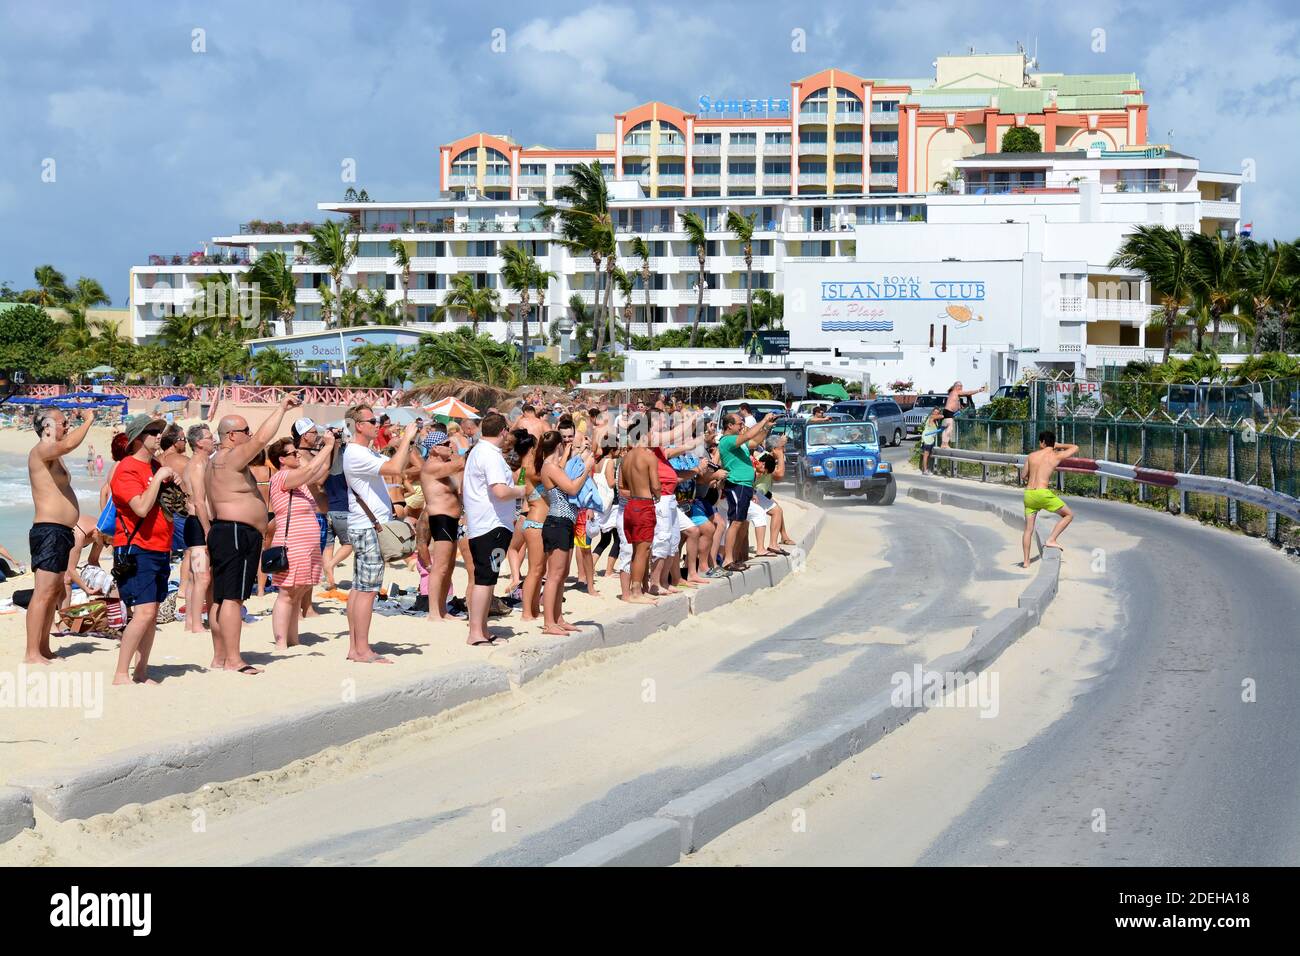 Maho Beach packed with tourists waiting departing aircraft from St. Maarten Airport in the Caribbean awating jet blast. Popular SXM tourist activity. Stock Photo